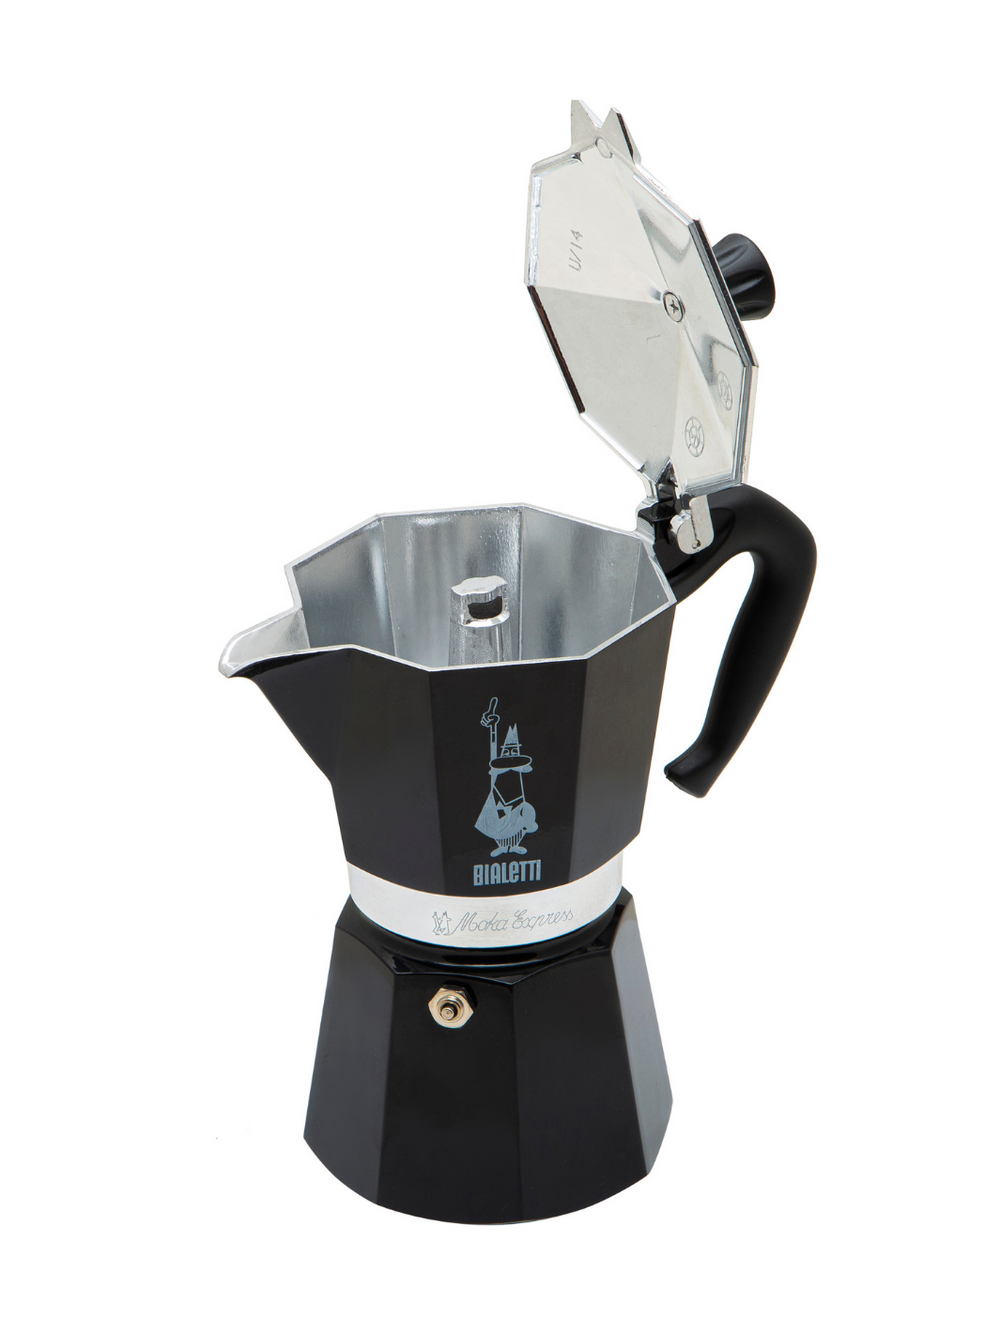  Bialetti - Moka Induction, Moka Pot, Suitable for all Types of  Hobs, 6 Cups Espresso (7.9 Oz Espresso), 280 ml, Black: Home & Kitchen